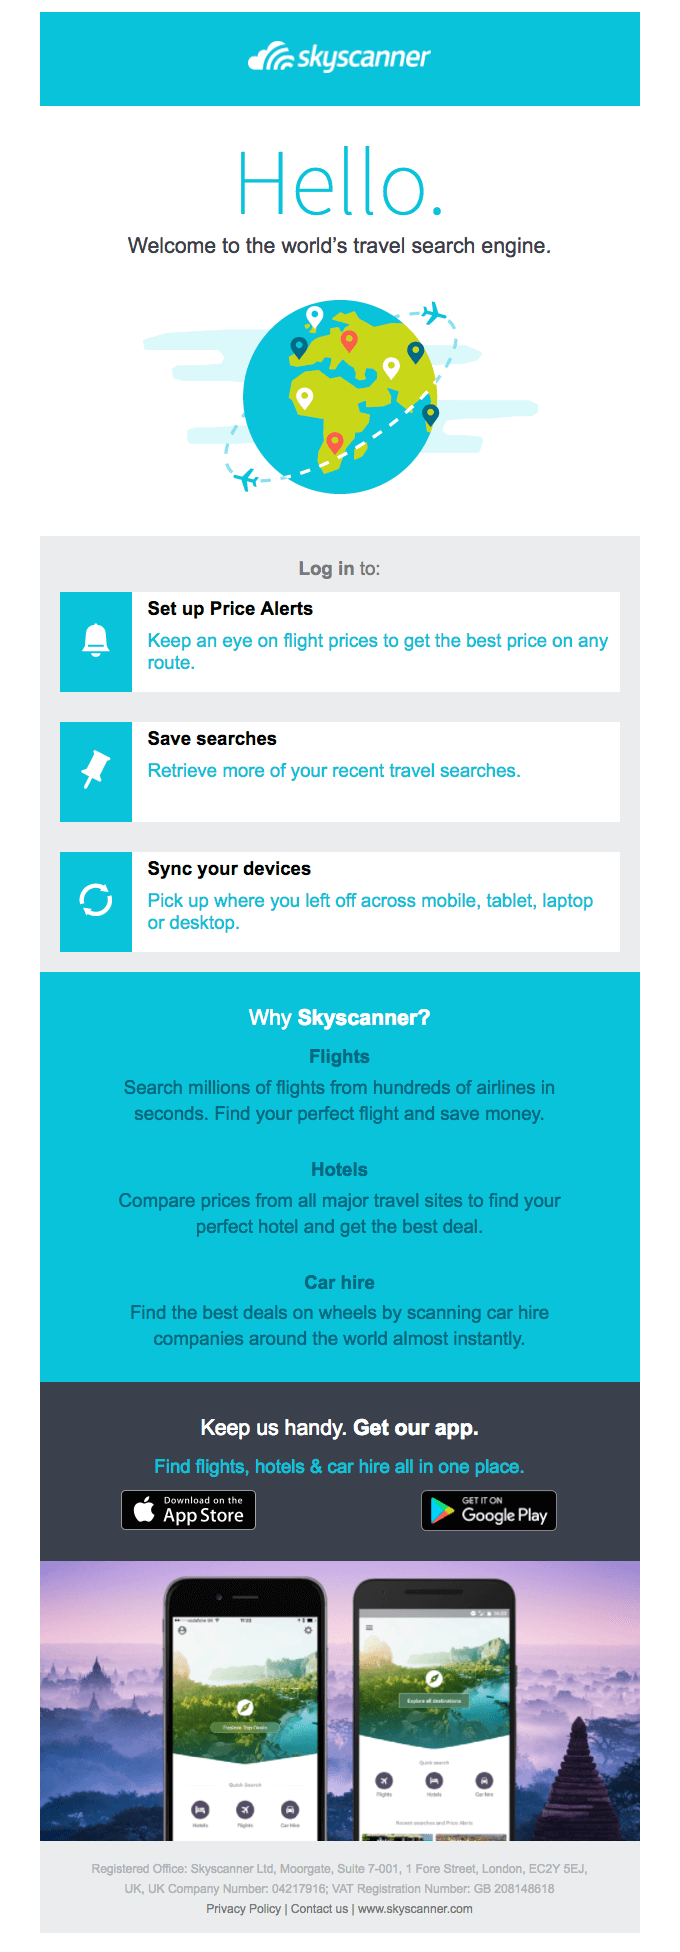 Skyscanner welcome email